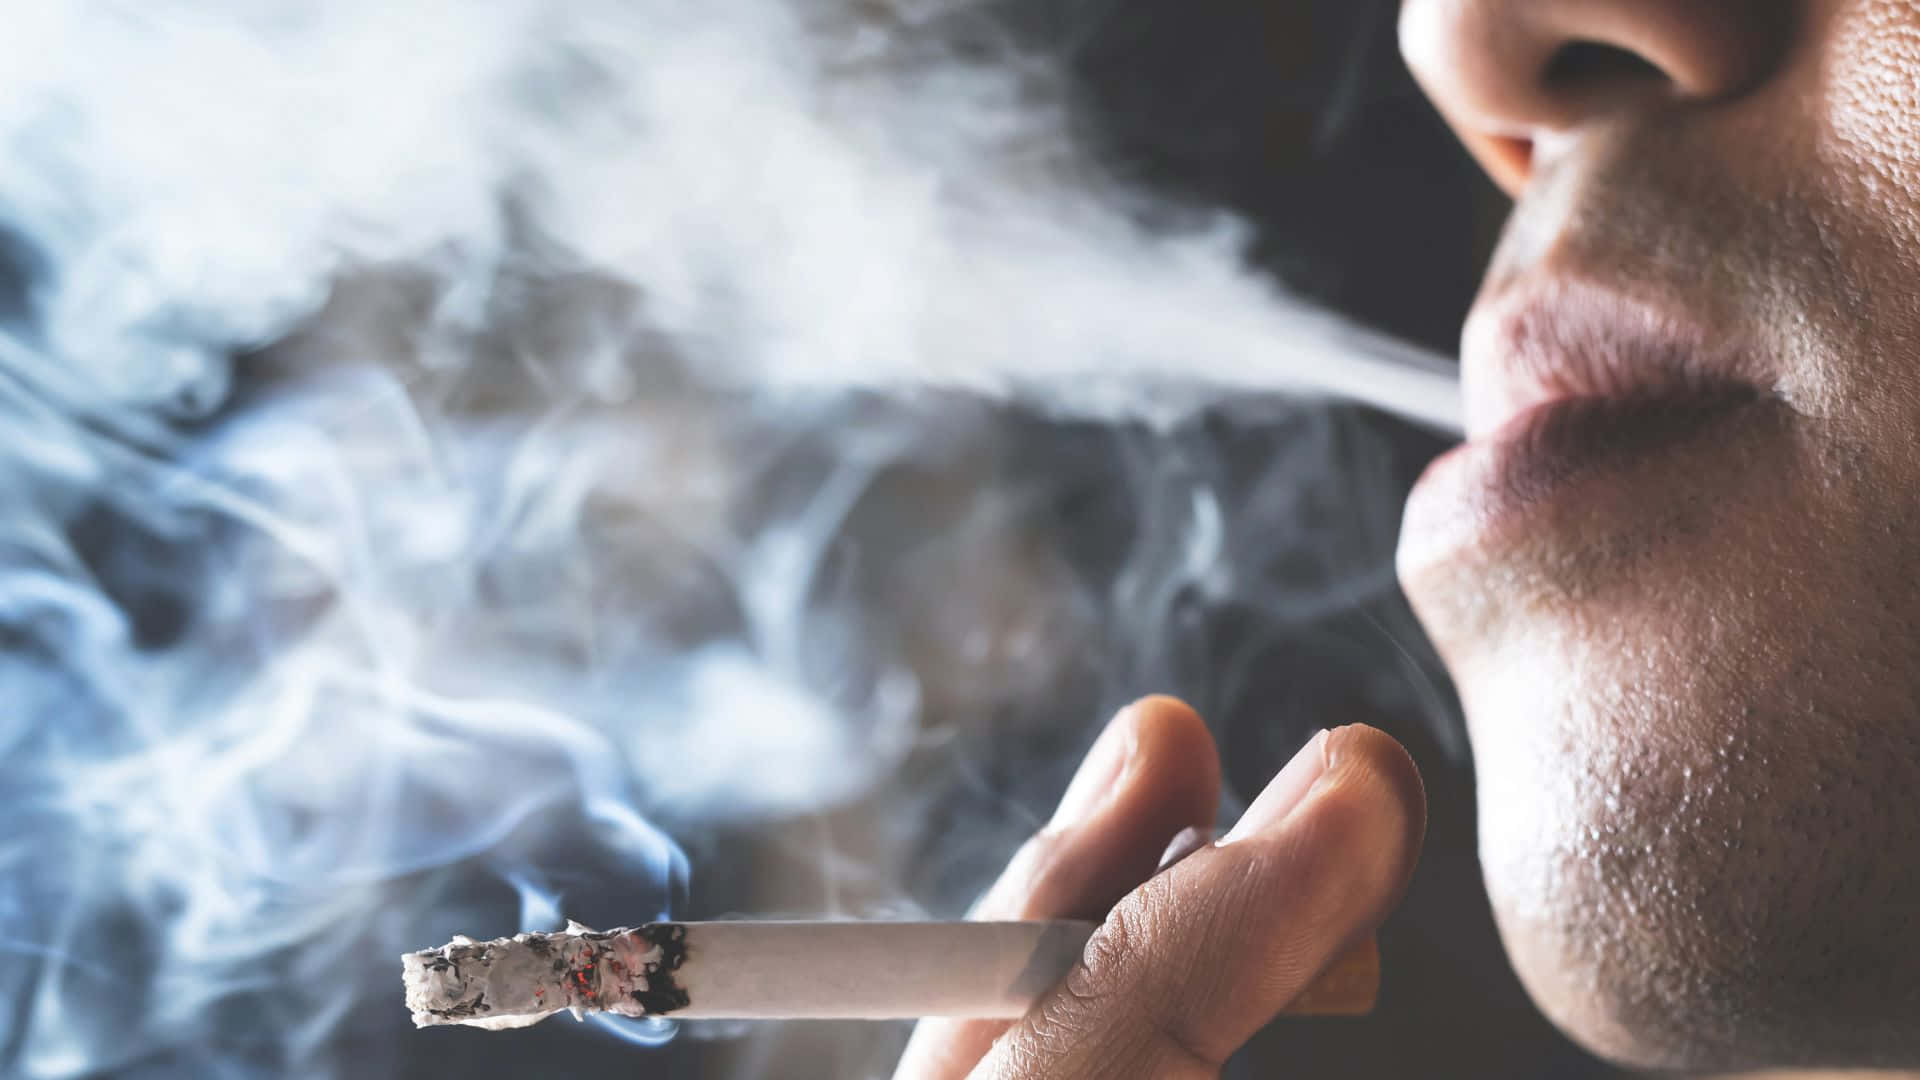 Smoking not only damages your health, but also your finances